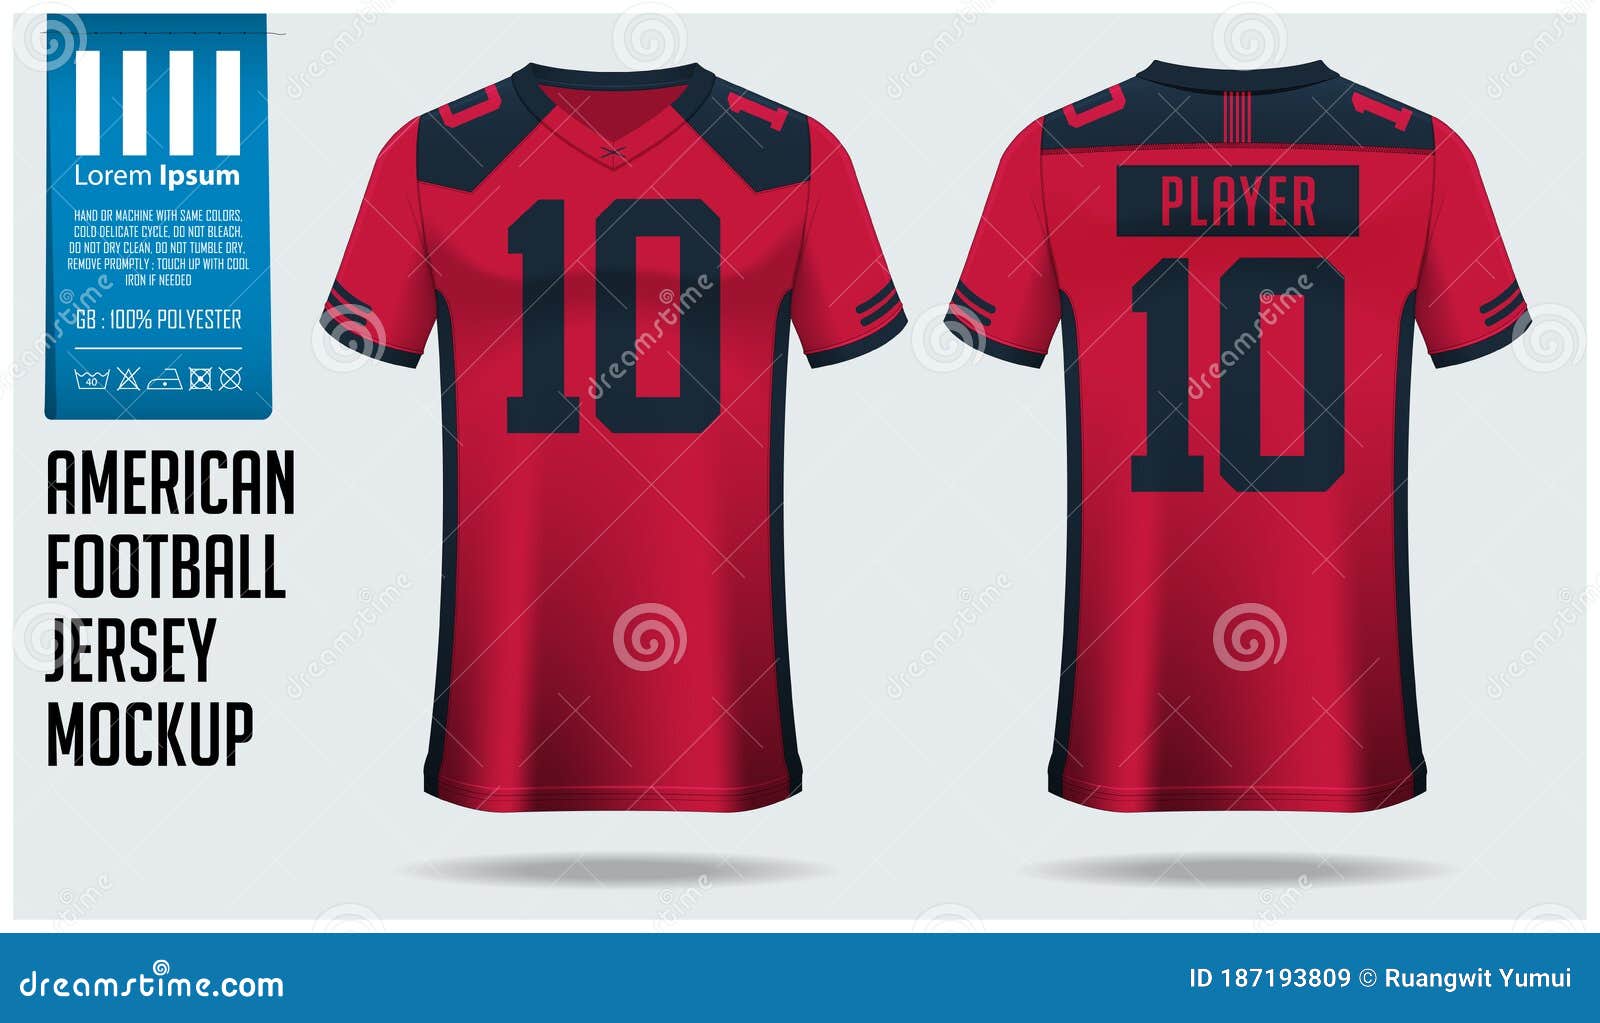 black red and blue jersey